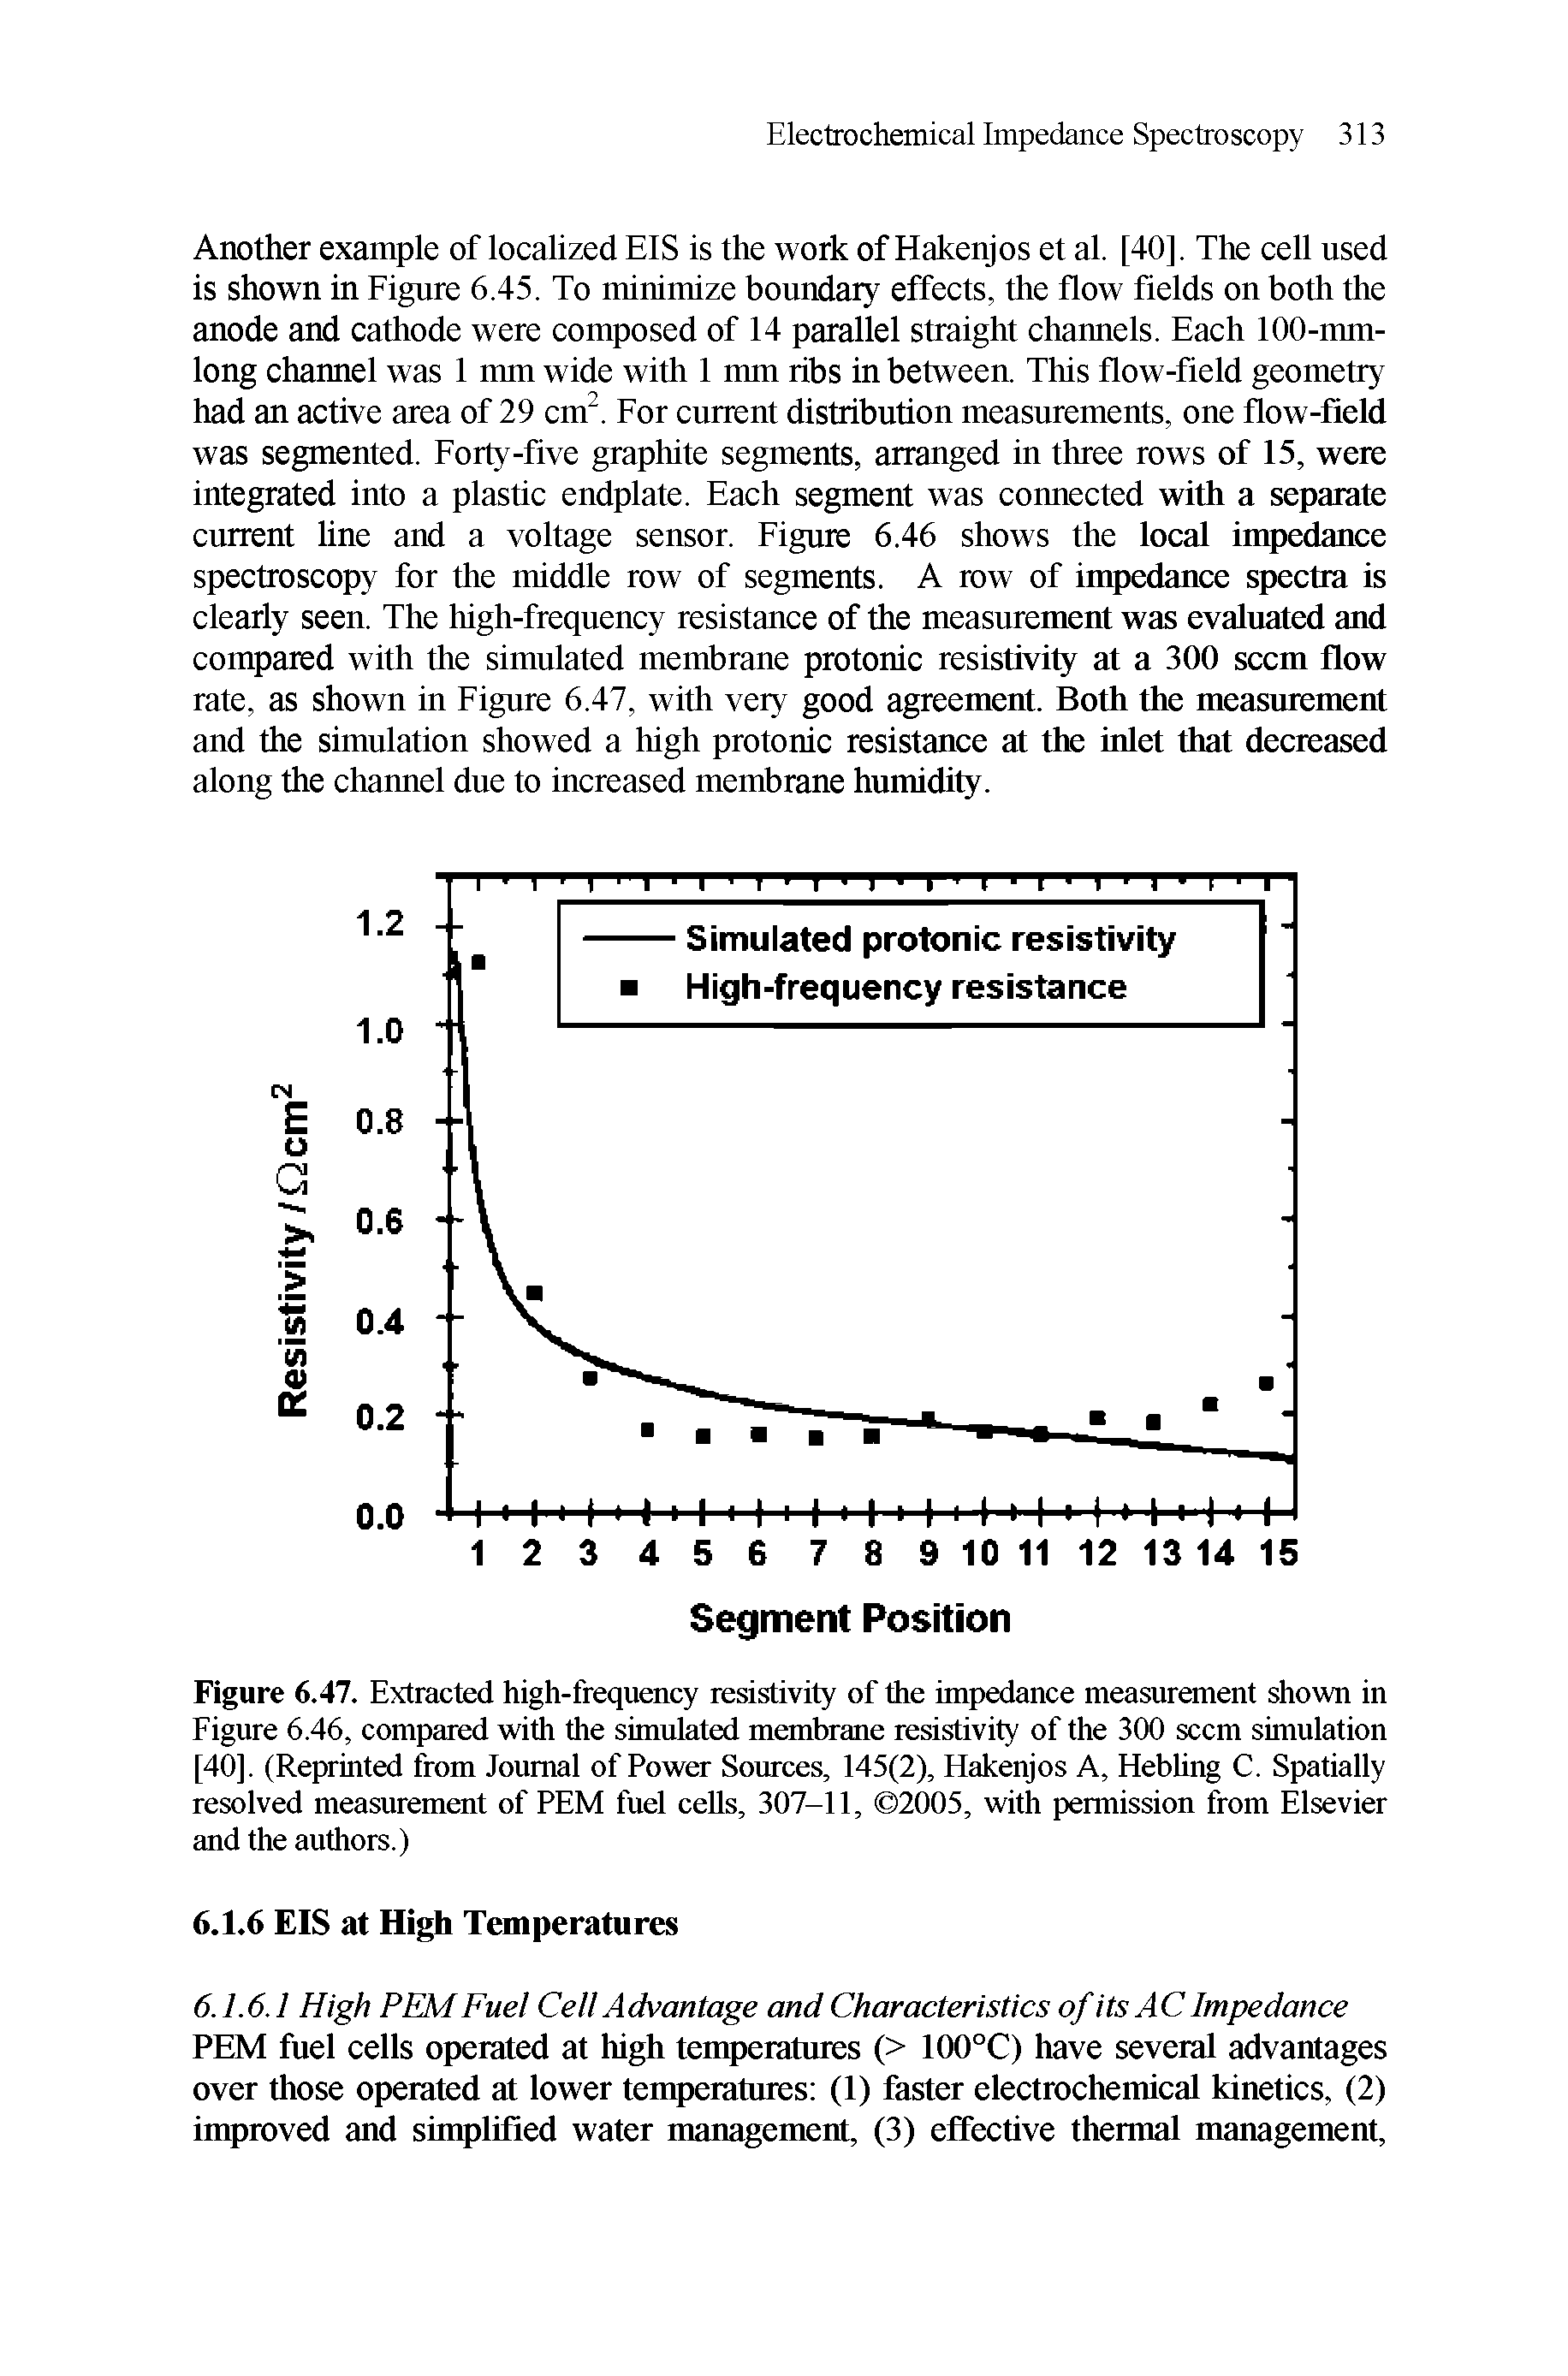 Figure 6.47. Extracted high-frequency resistivity of the impedance measurement shown in Figure 6.46, compared with the simulated membrane resistivity of the 300 seem simulation [40]. (Reprinted from Journal of Power Sources, 145(2), Hakenjos A, Hebling C. Spatially resolved measurement of PEM fuel cells, 307-11, 2005, with permission from Elsevier and the authors.)...